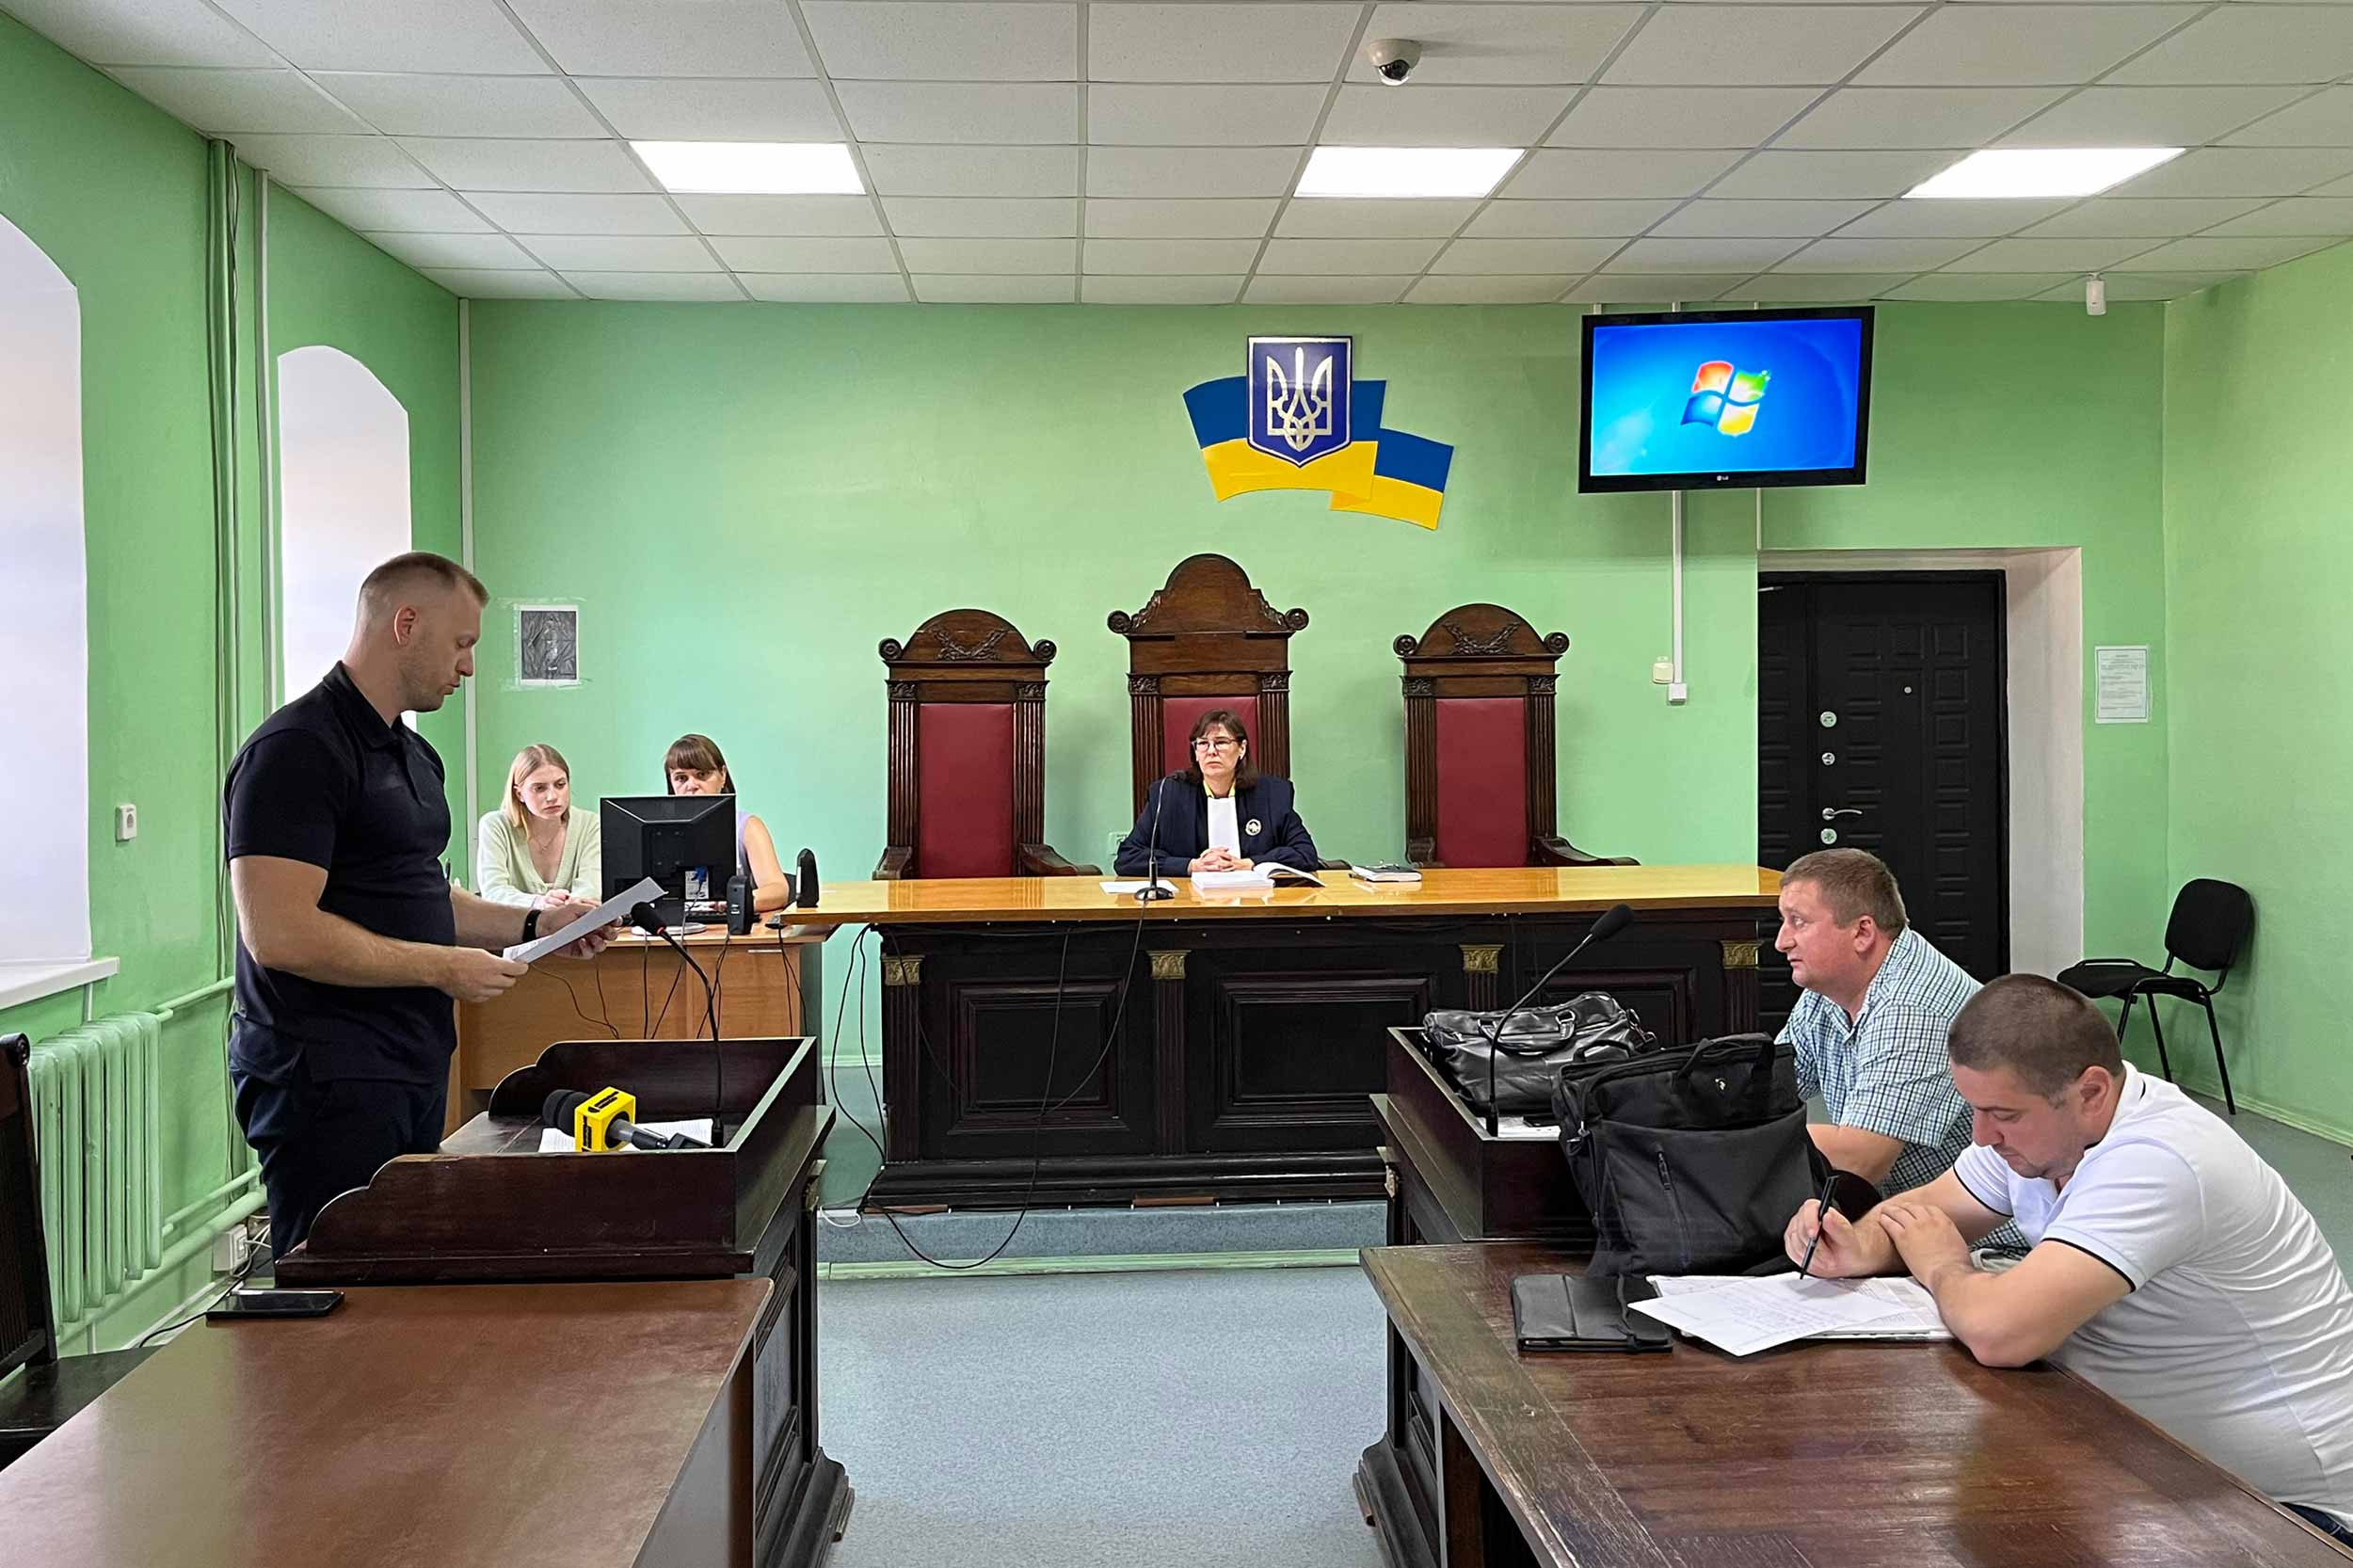 The Chernihiv district court has begun hearing how nearly 400 civilians were allegedly held hostage by Russian soldiers for nearly a month in a school basement and forced to endure appalling conditions. © I. Domashchenko